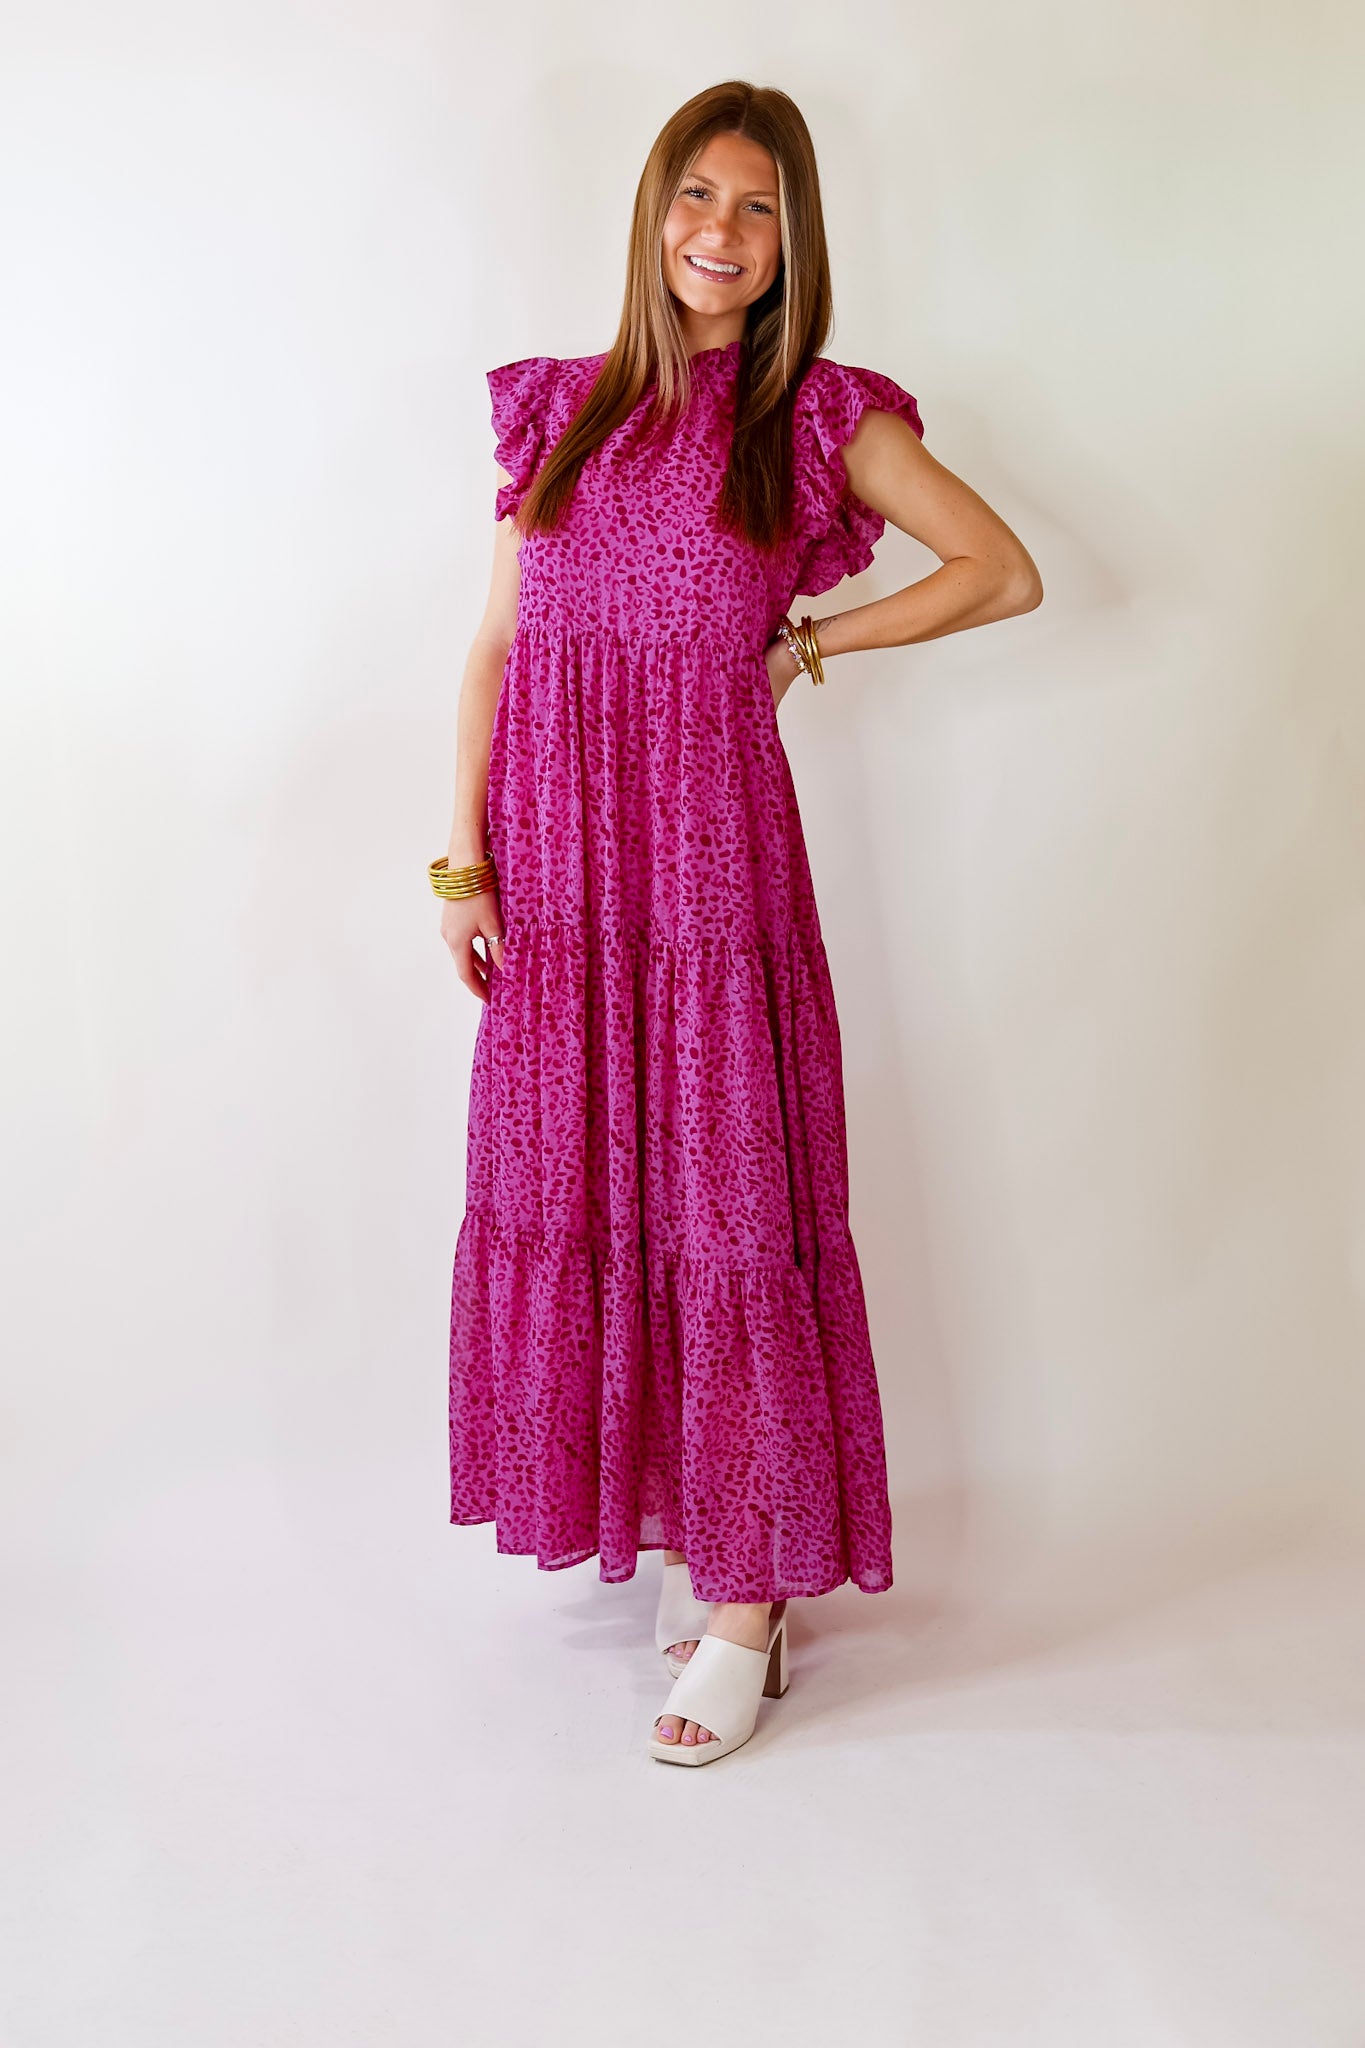 Settle The Score Leopard Print Maxi Dress in Magenta Pink - Giddy Up Glamour Boutique